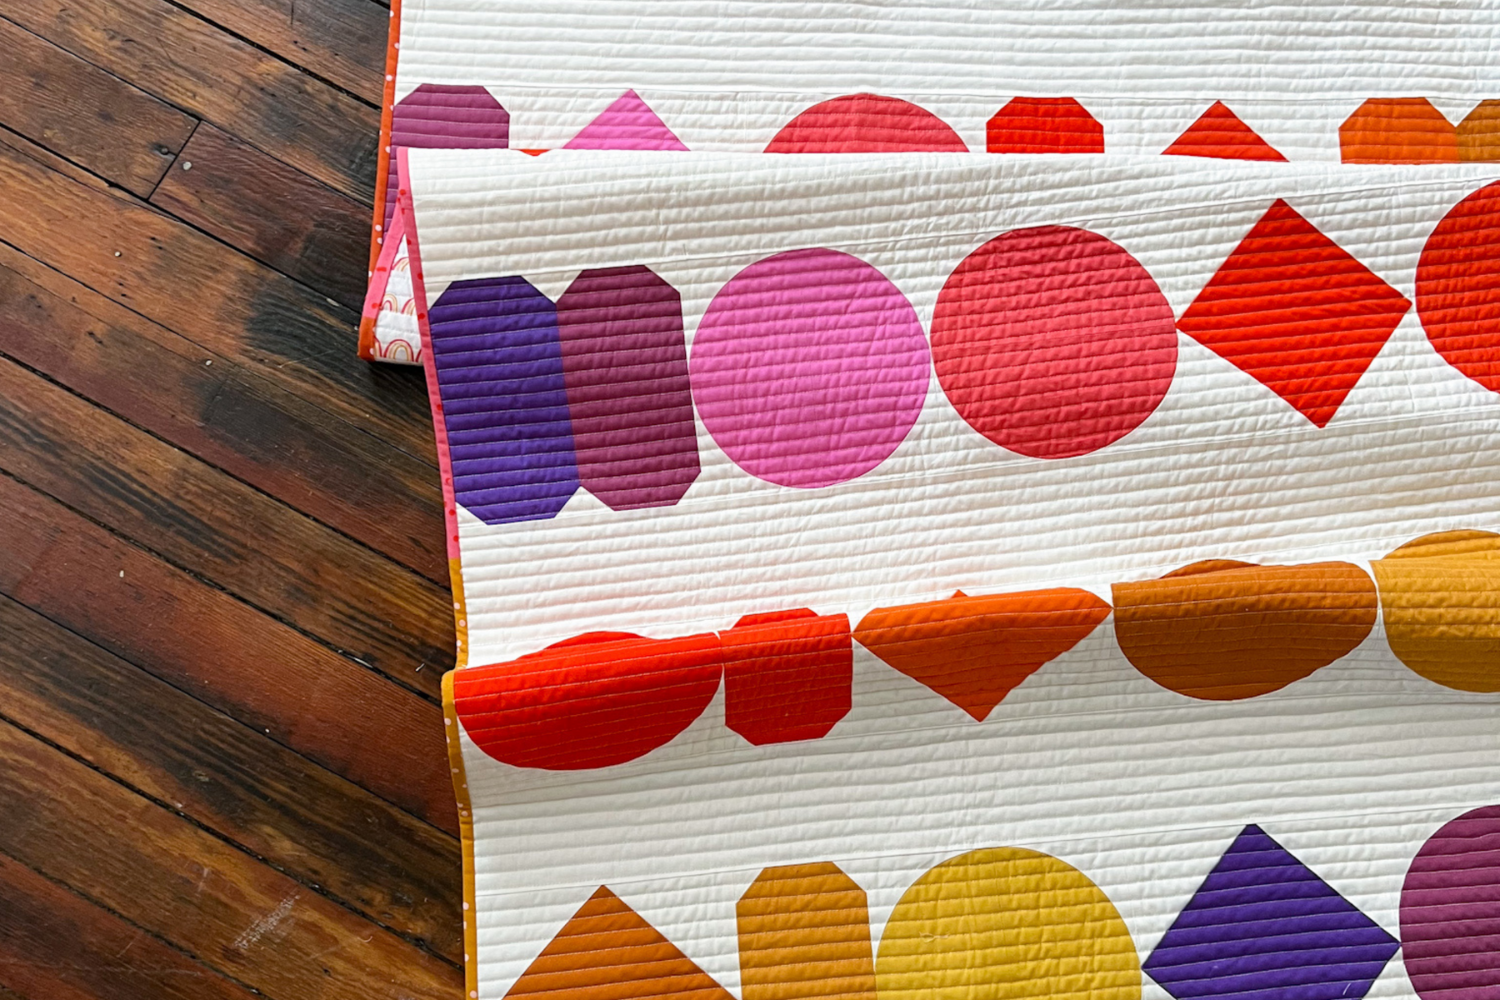 A quilt lies on a dark wooden plank floor. It has a white background and rows of bead shapes, round, oval, square, and more, in jewel tone hues, pink, red, purple and yellow.